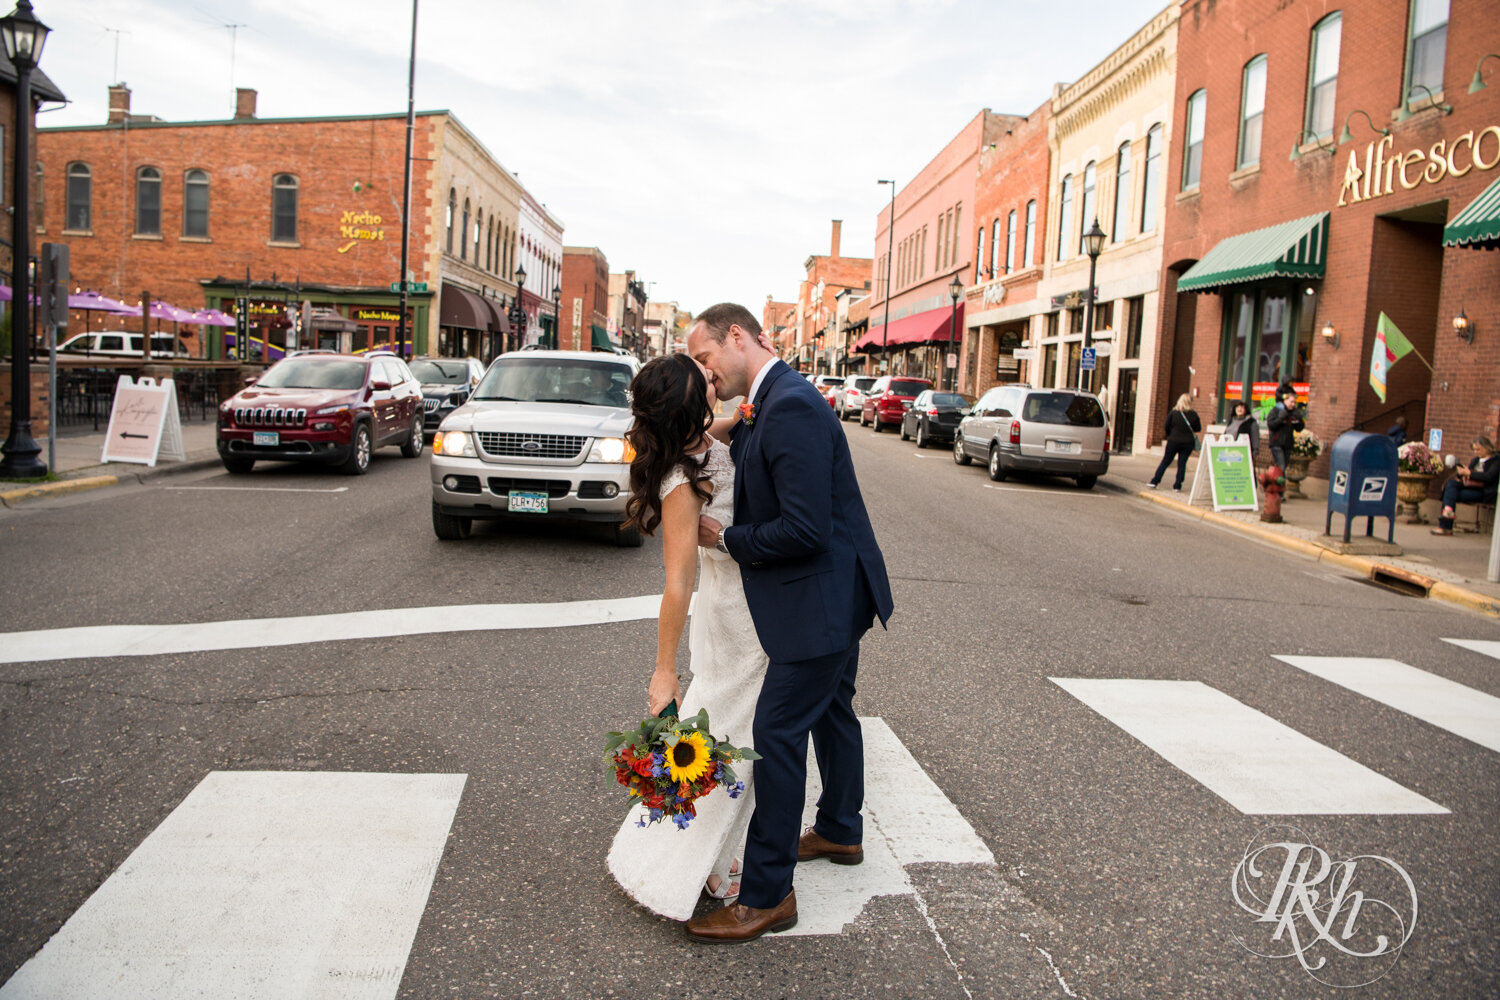 Bride and groom kiss in the street in Stillwater, Minnesota at sunset.